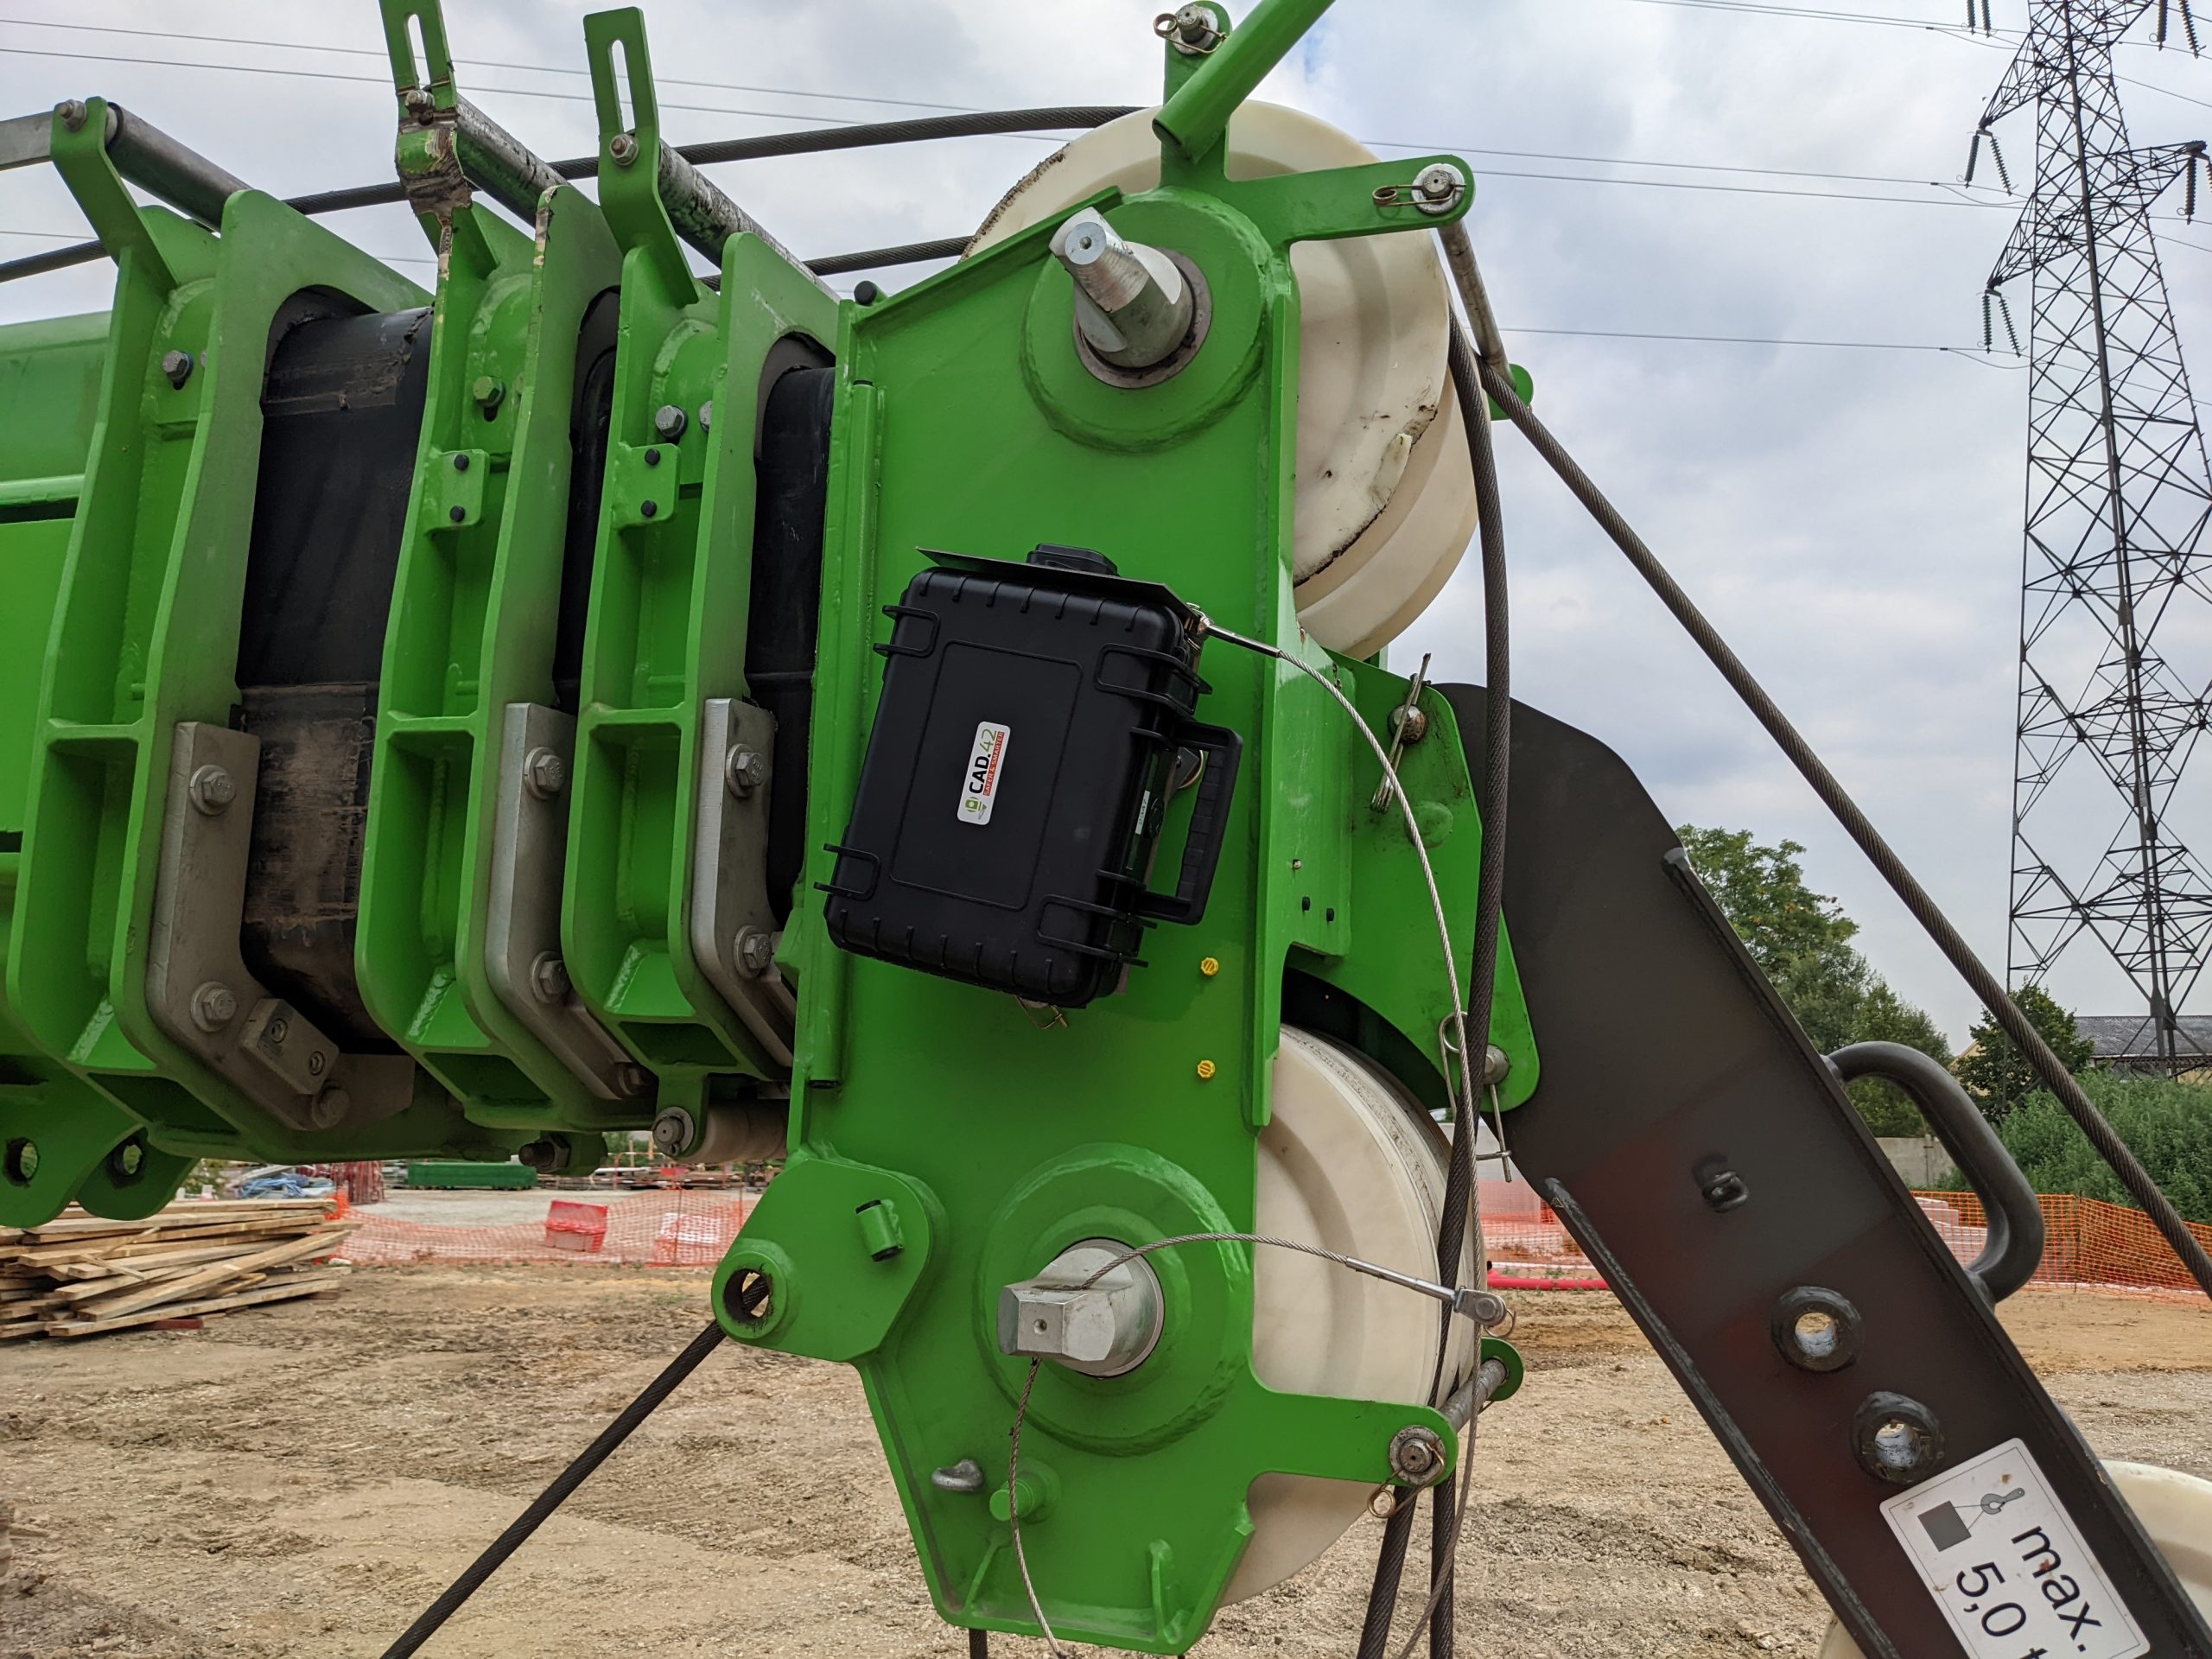 RTK.42 on a machine in the Gagny site